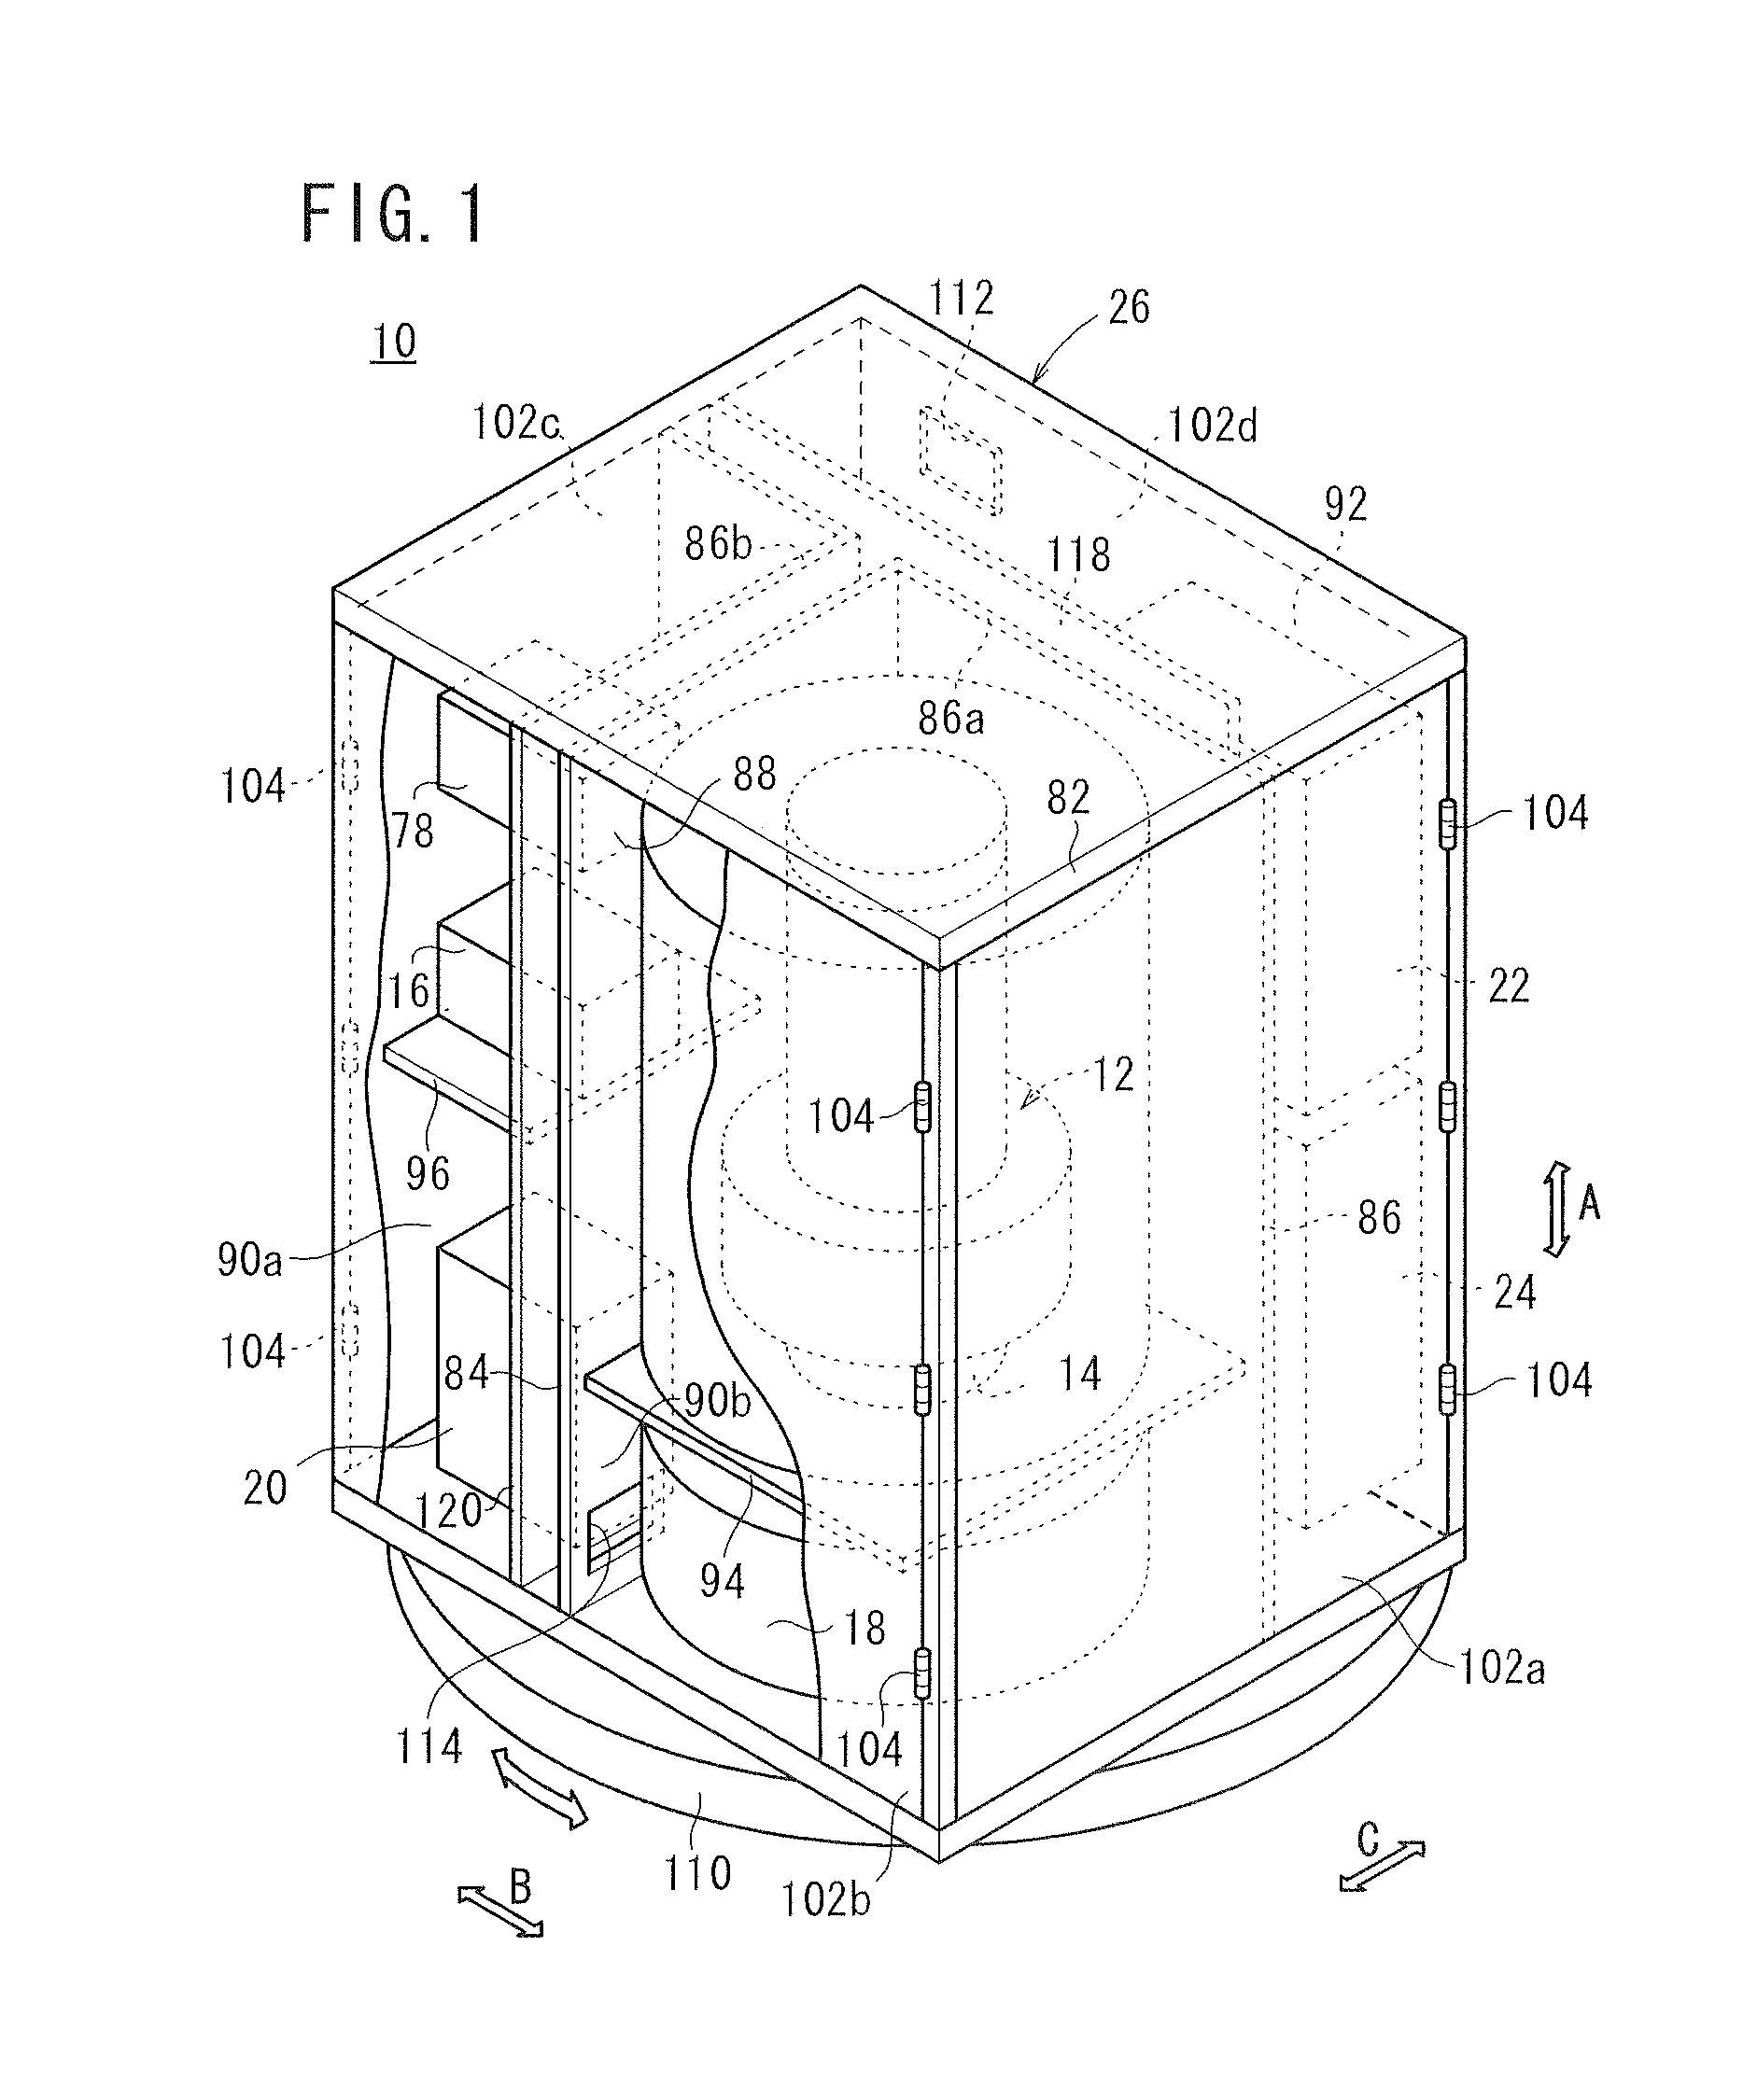 Fuel cell system